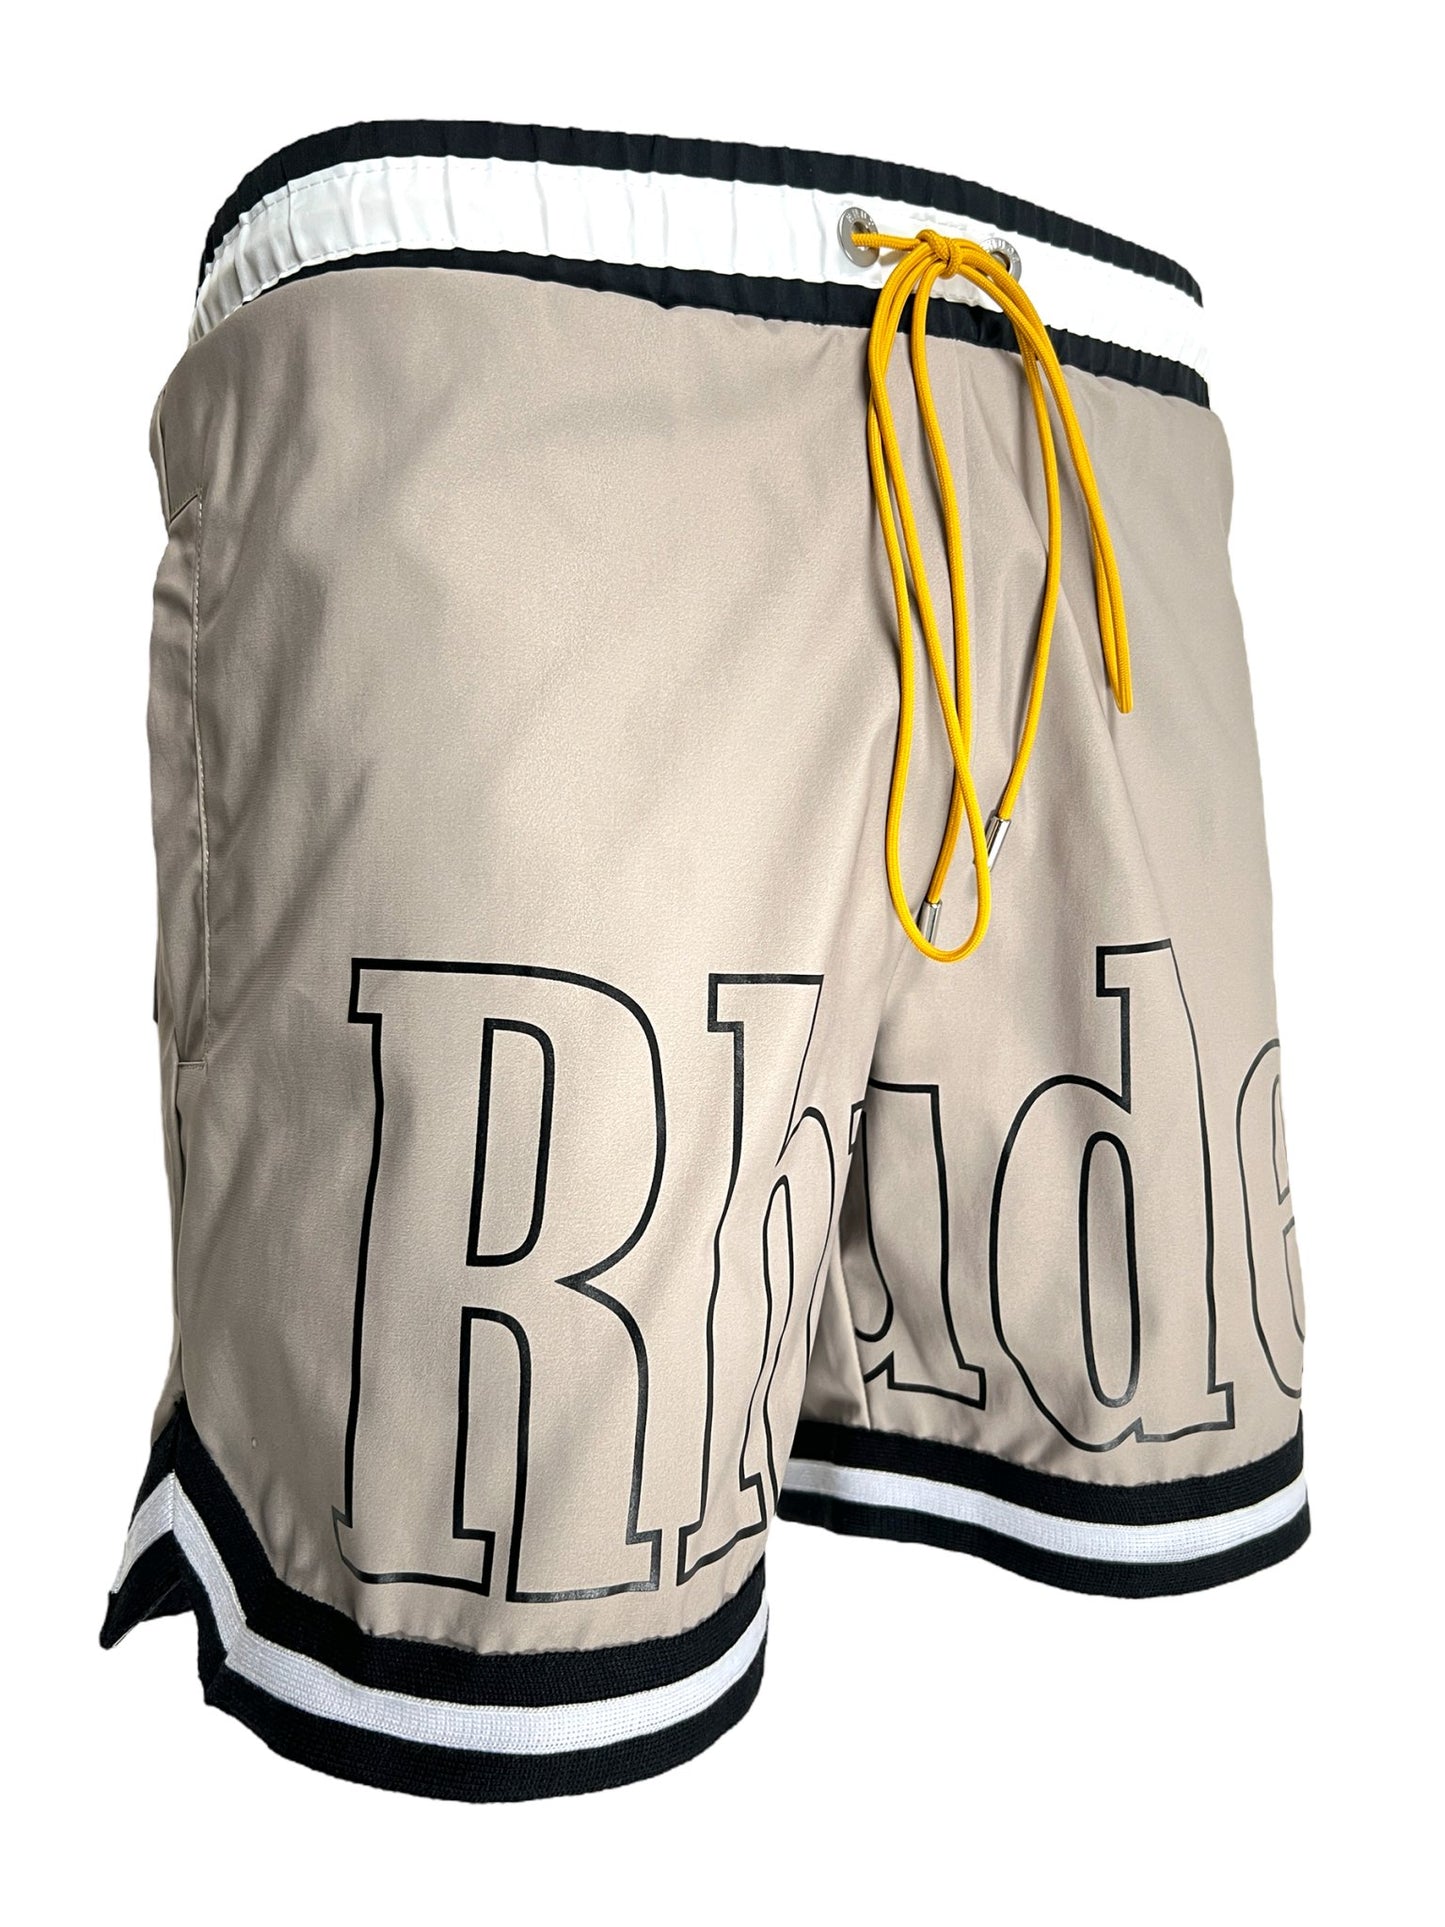 Pair of RHUDE BASKETBALL SWIM SHORT KHAKI with a contrasting trim and the word "RHUDE" printed on the side, featuring a yellow drawstring.